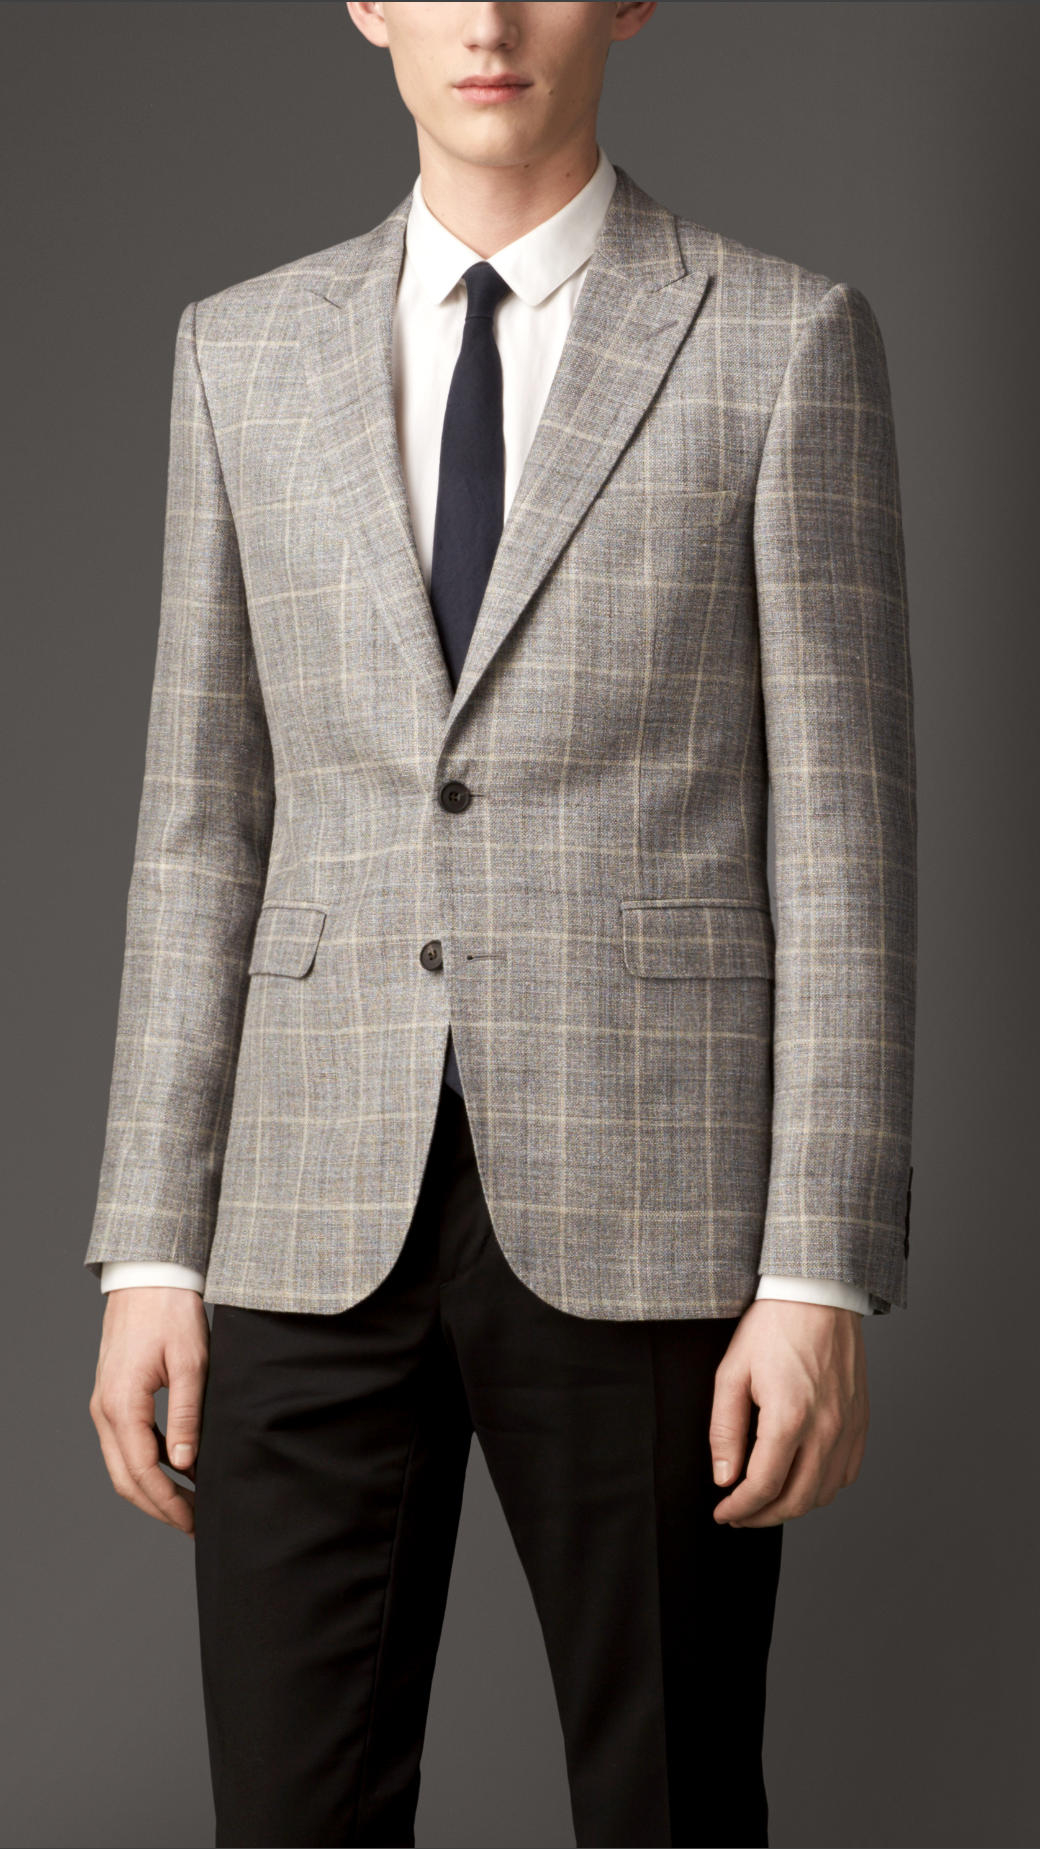 Lyst - Burberry Slim Fit Wool Silk Windowpane Check Jacket in Gray for Men